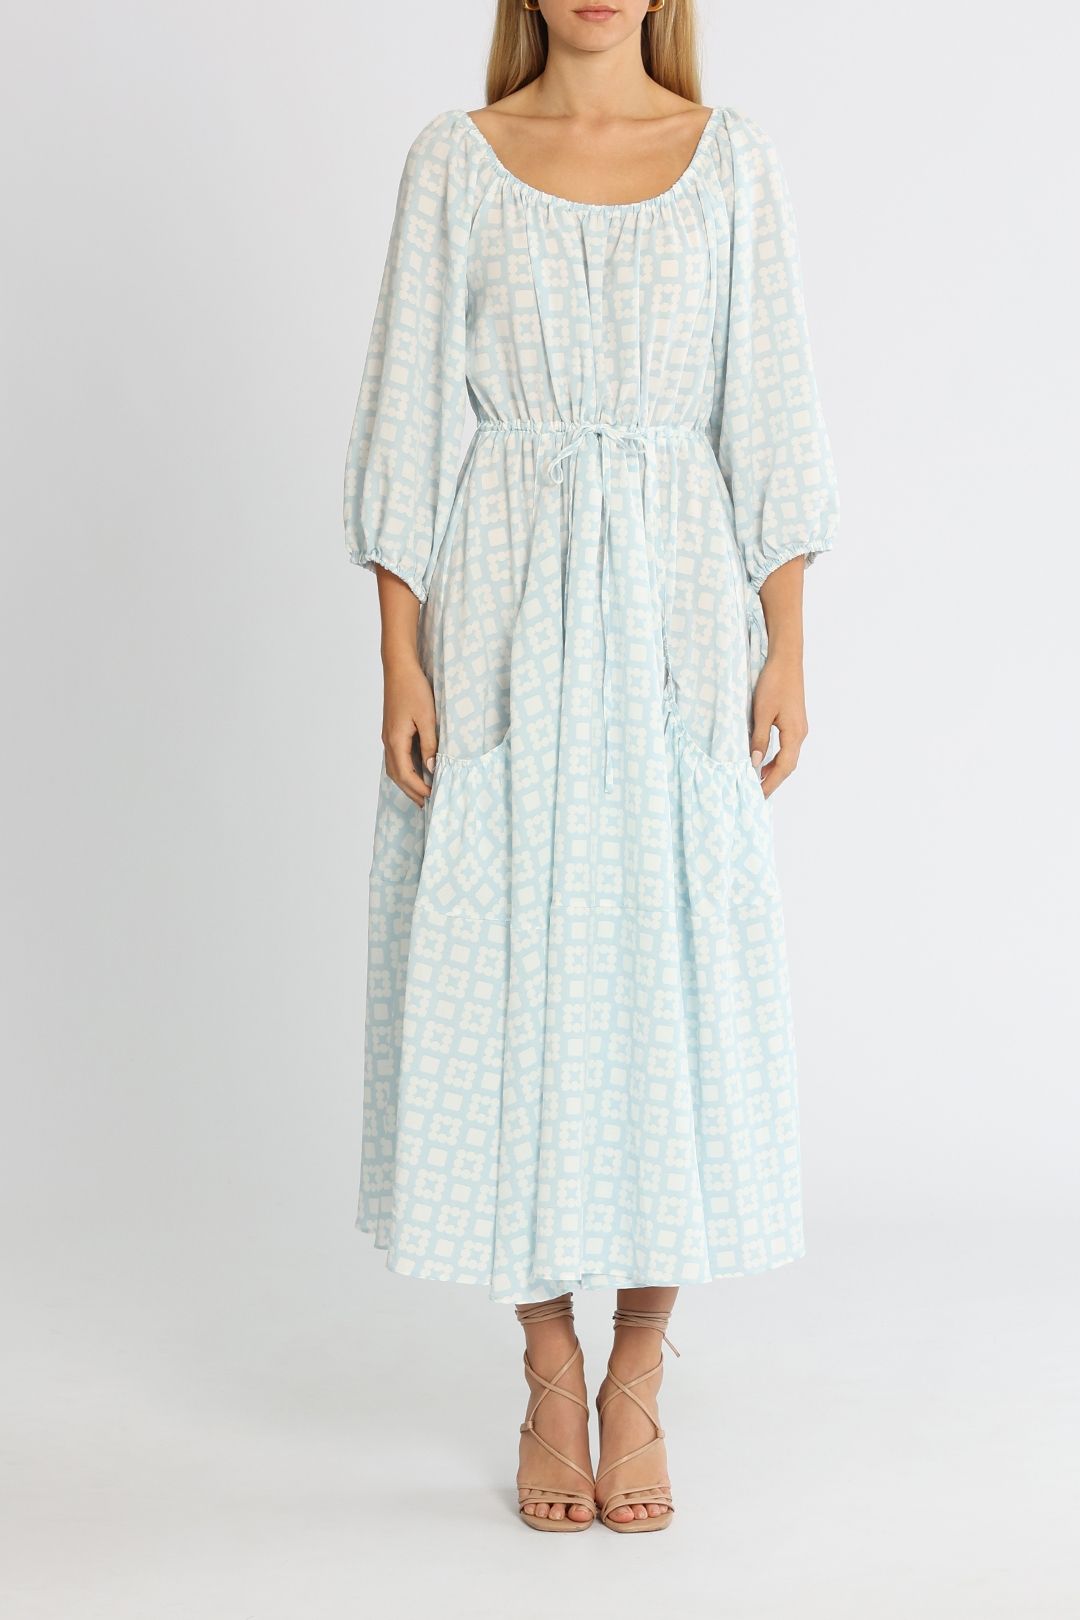 Brave and True Kindred Puff Sleeve Dress Code Blue